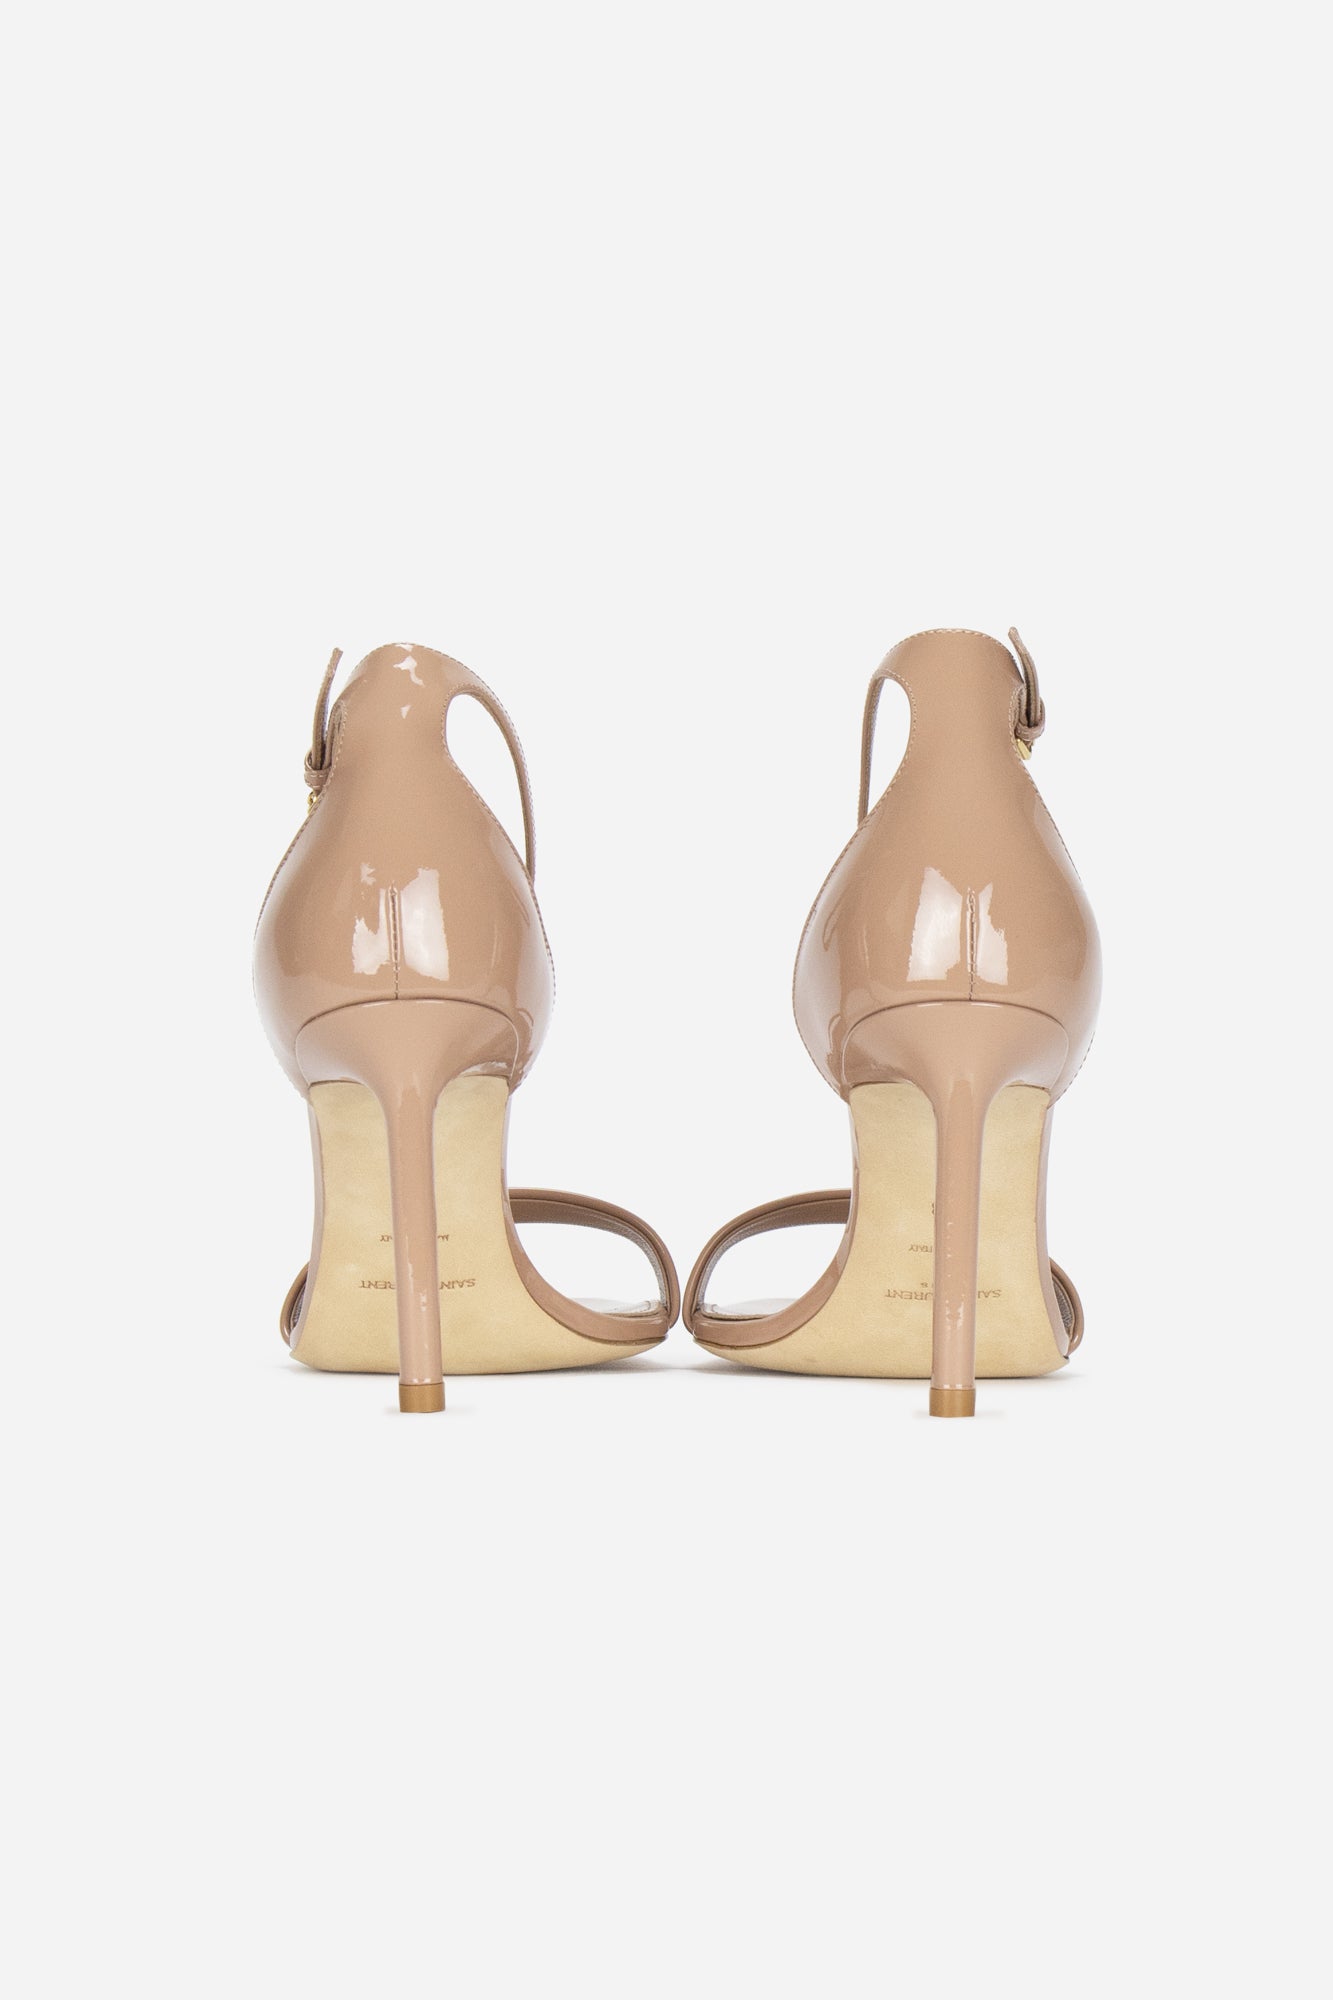 Nude Patent Leather Amber Heeled Sandals 85mm